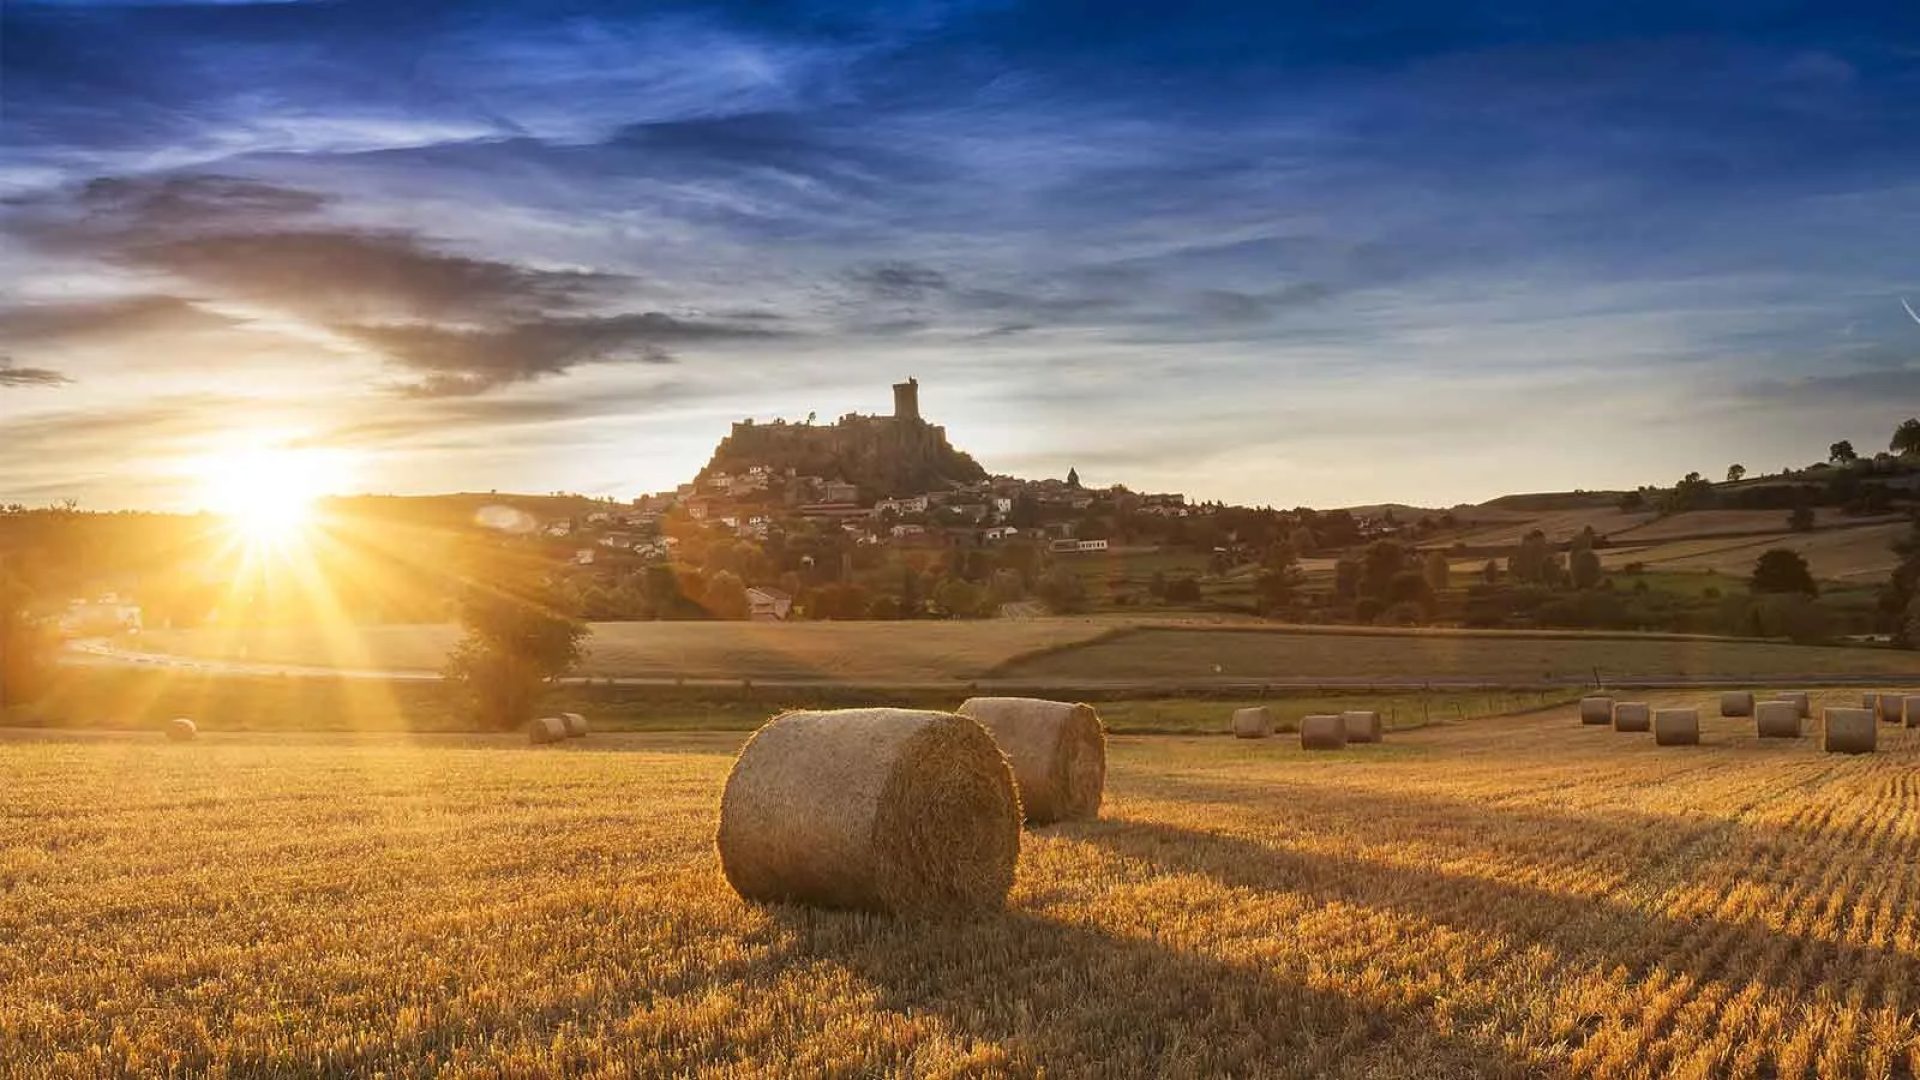 A setting sun over a field with the fortress of Polignac in the background in Haute-Loire, Auvergne